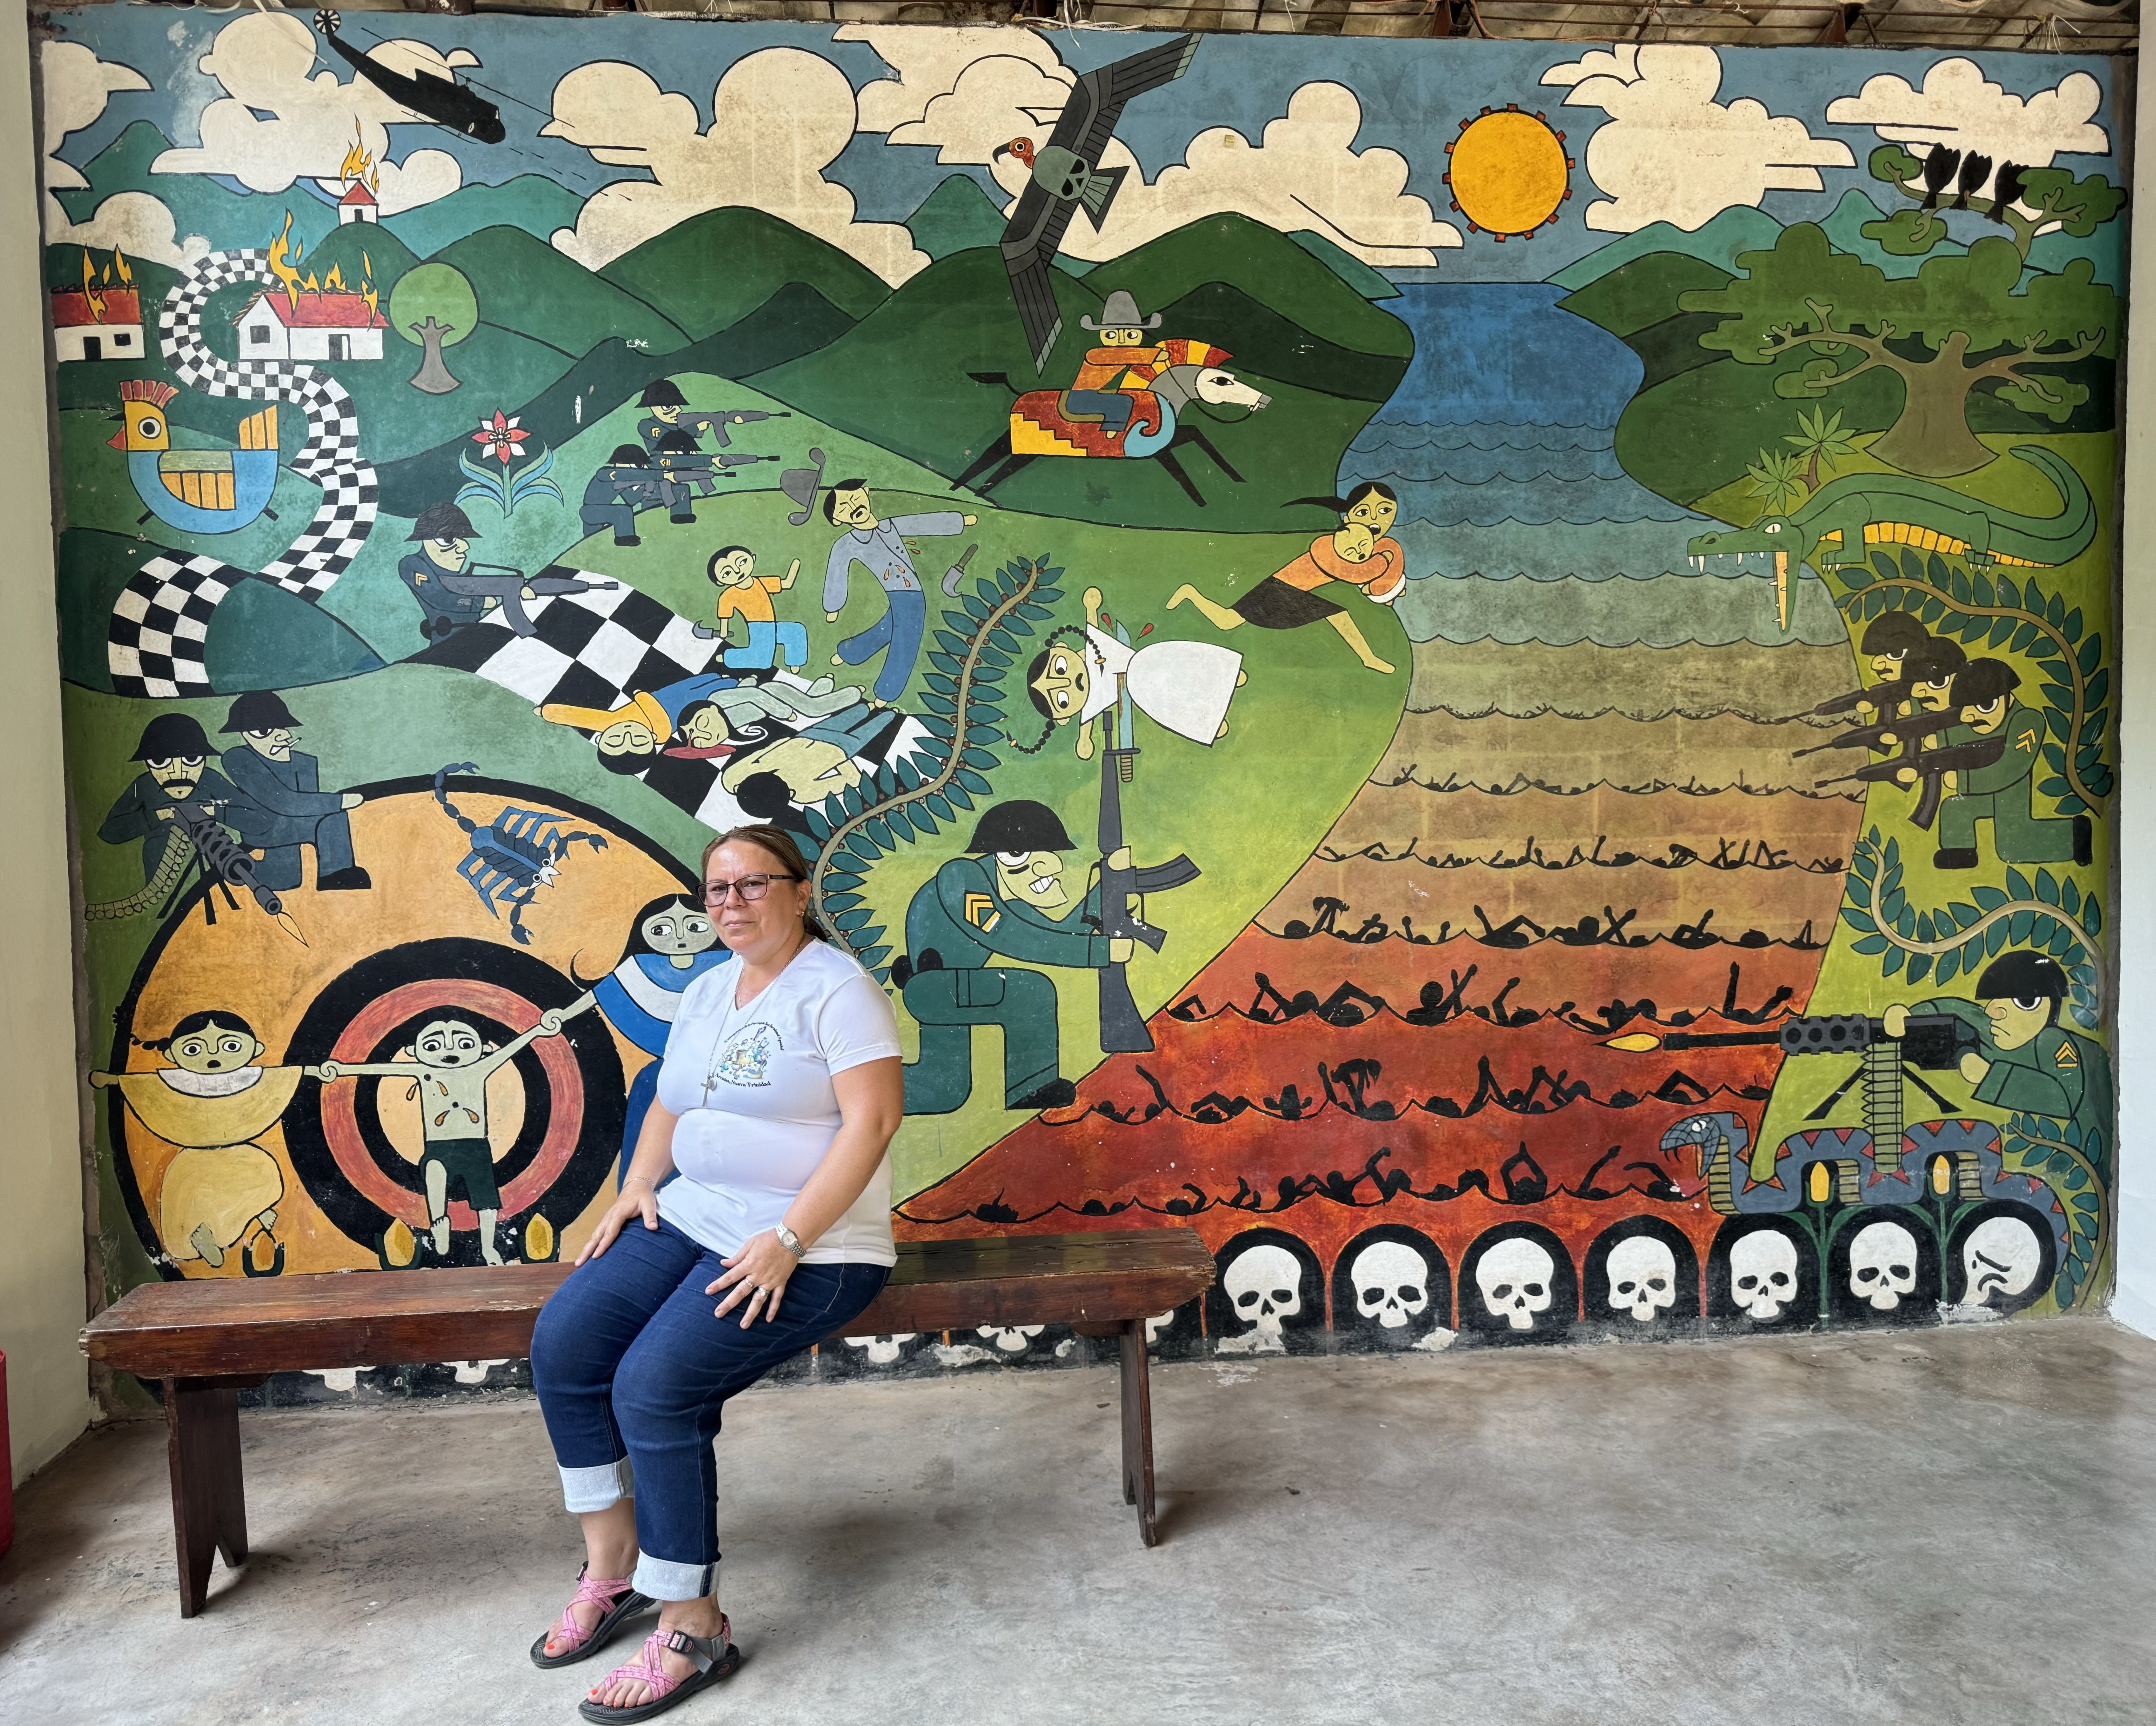 Providence Sr. Vilma Franco sits on a bench in her hometown of Arcatao, El Salvador, April 27, in front of a mural depicting the 1980 massacre on the Sumpul River. Each year, organizations like the Sumpul Association remember the massacre of more than 600 people by armed forces, with a pilgrimage and Mass, an effort to educate and prevent future atrocities. (GSR photo/Rhina Guidos)